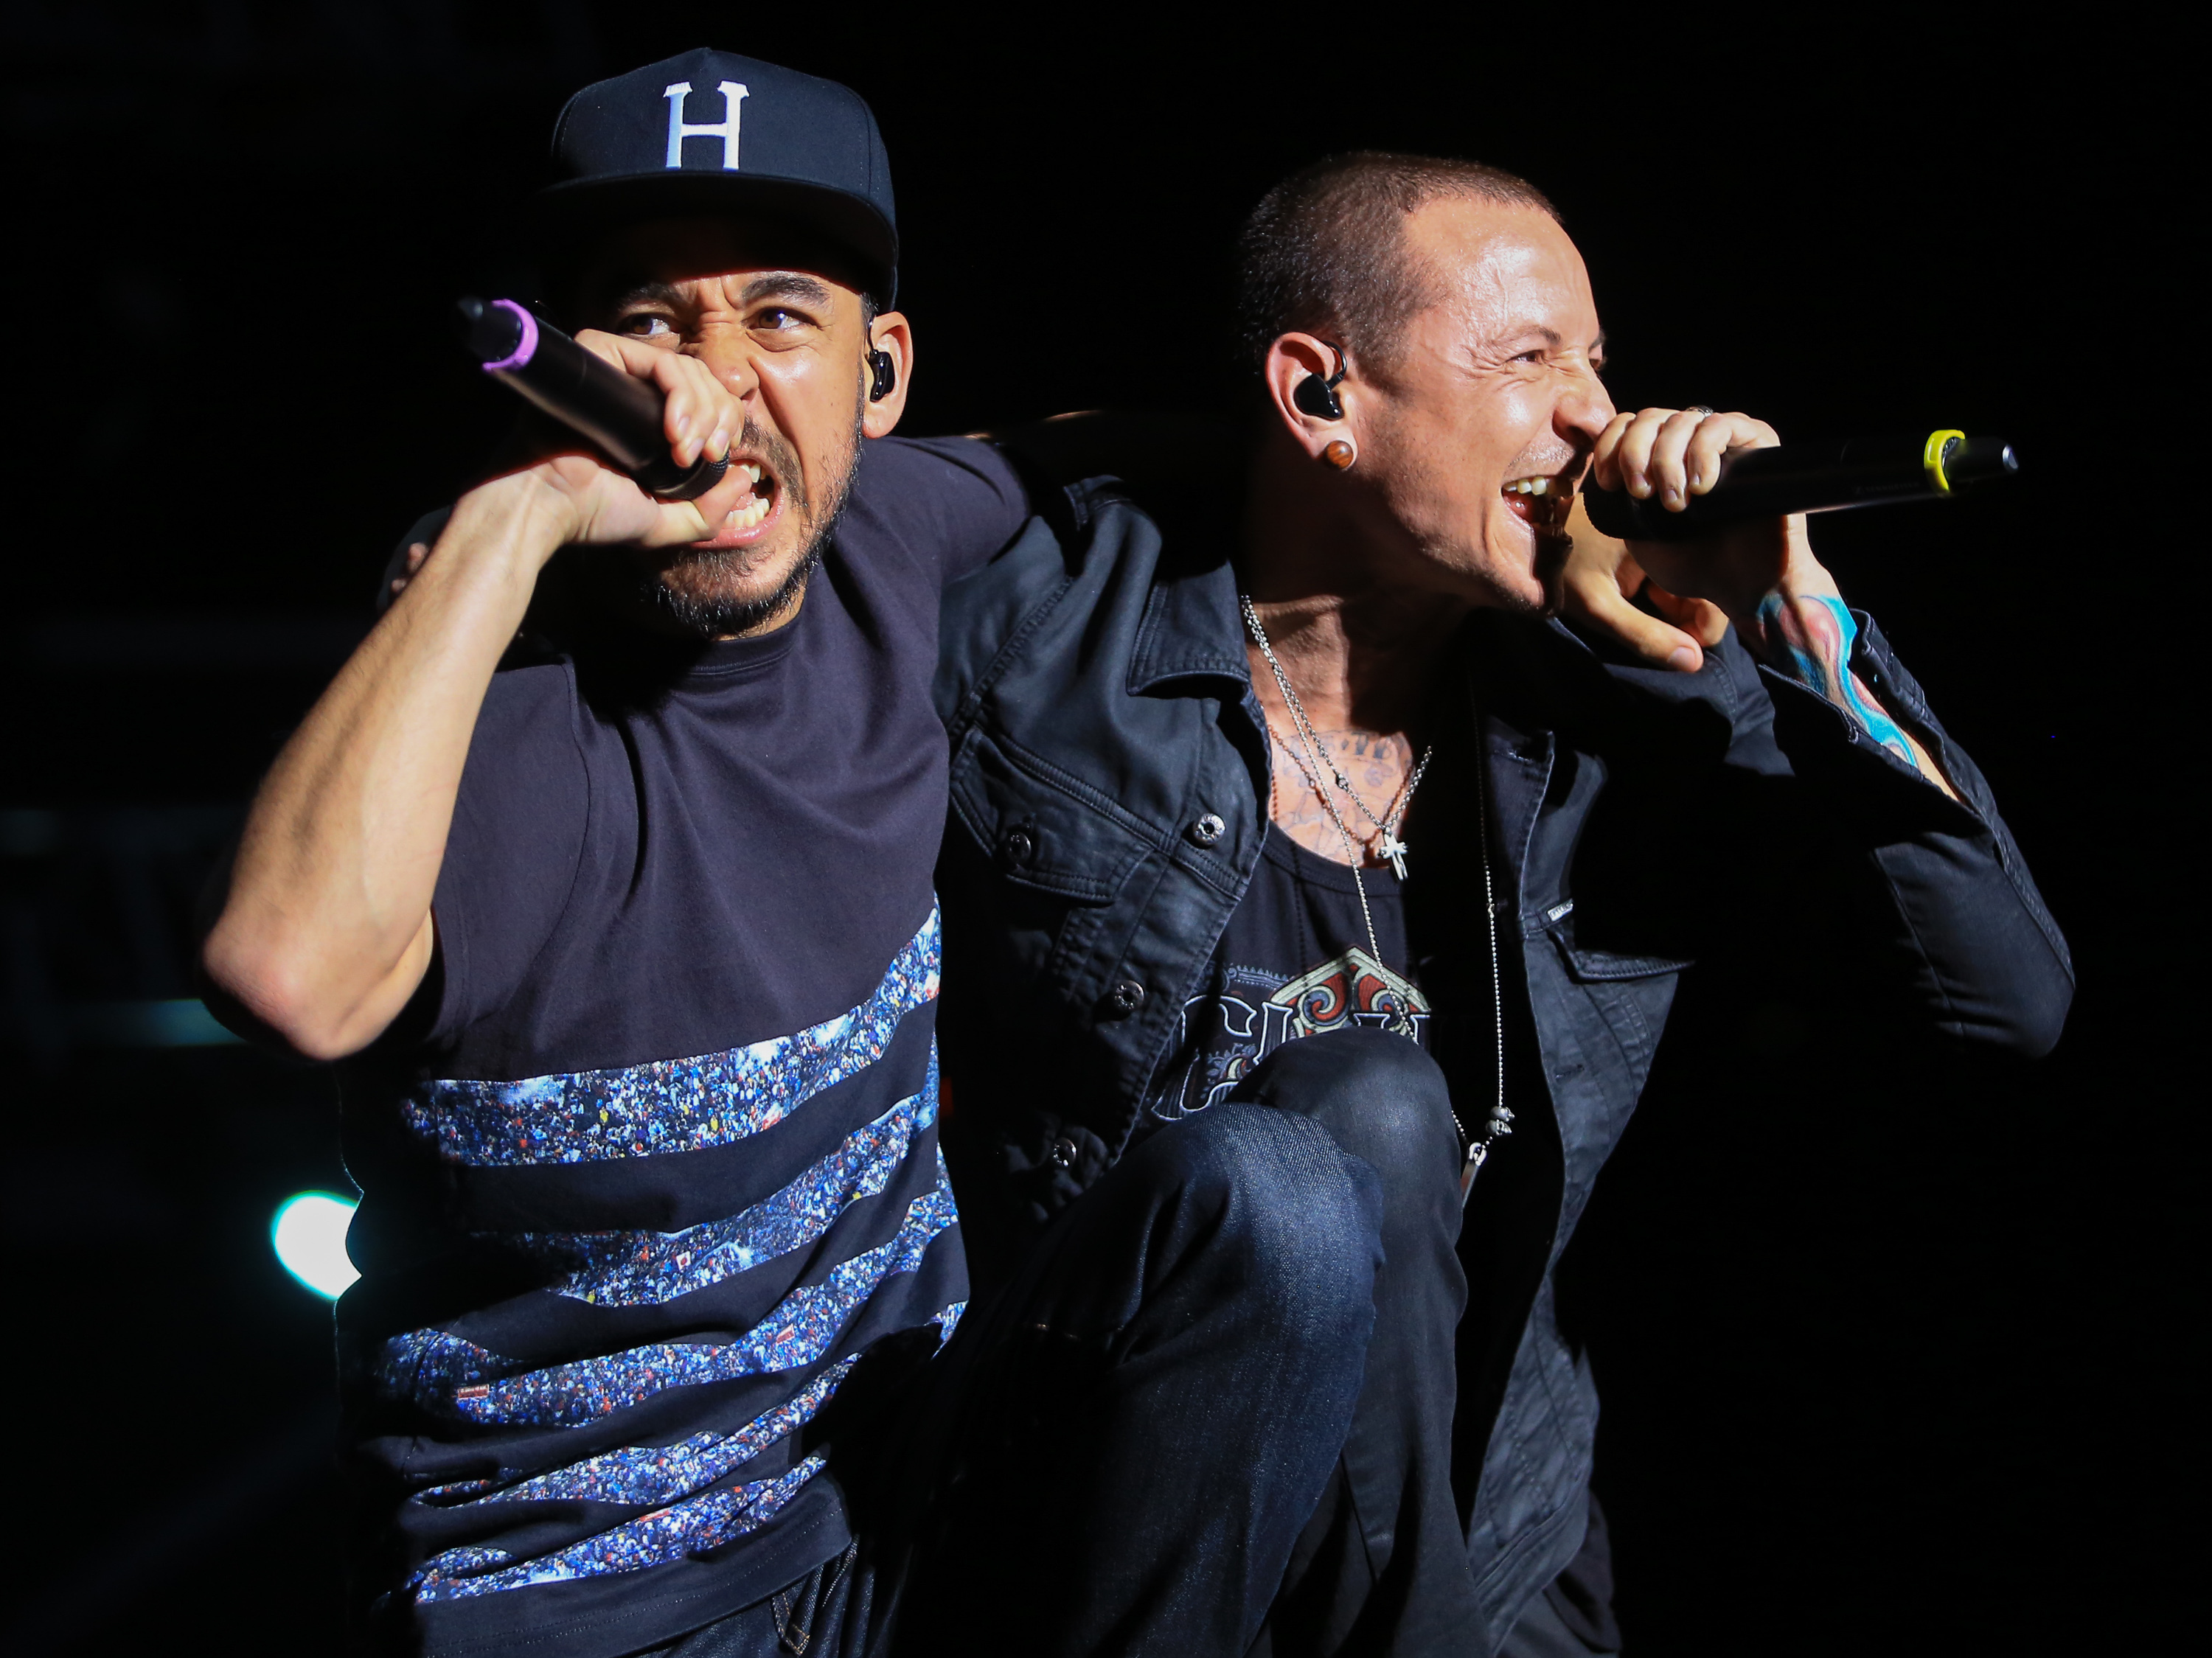 Musicians Mike Shinoda and Chester Bennington of Linkin Park perform at MAPFRE Stadium on May 17, 2015 in Columbus, Ohio. (Jason Squires&mdash;WireImage)